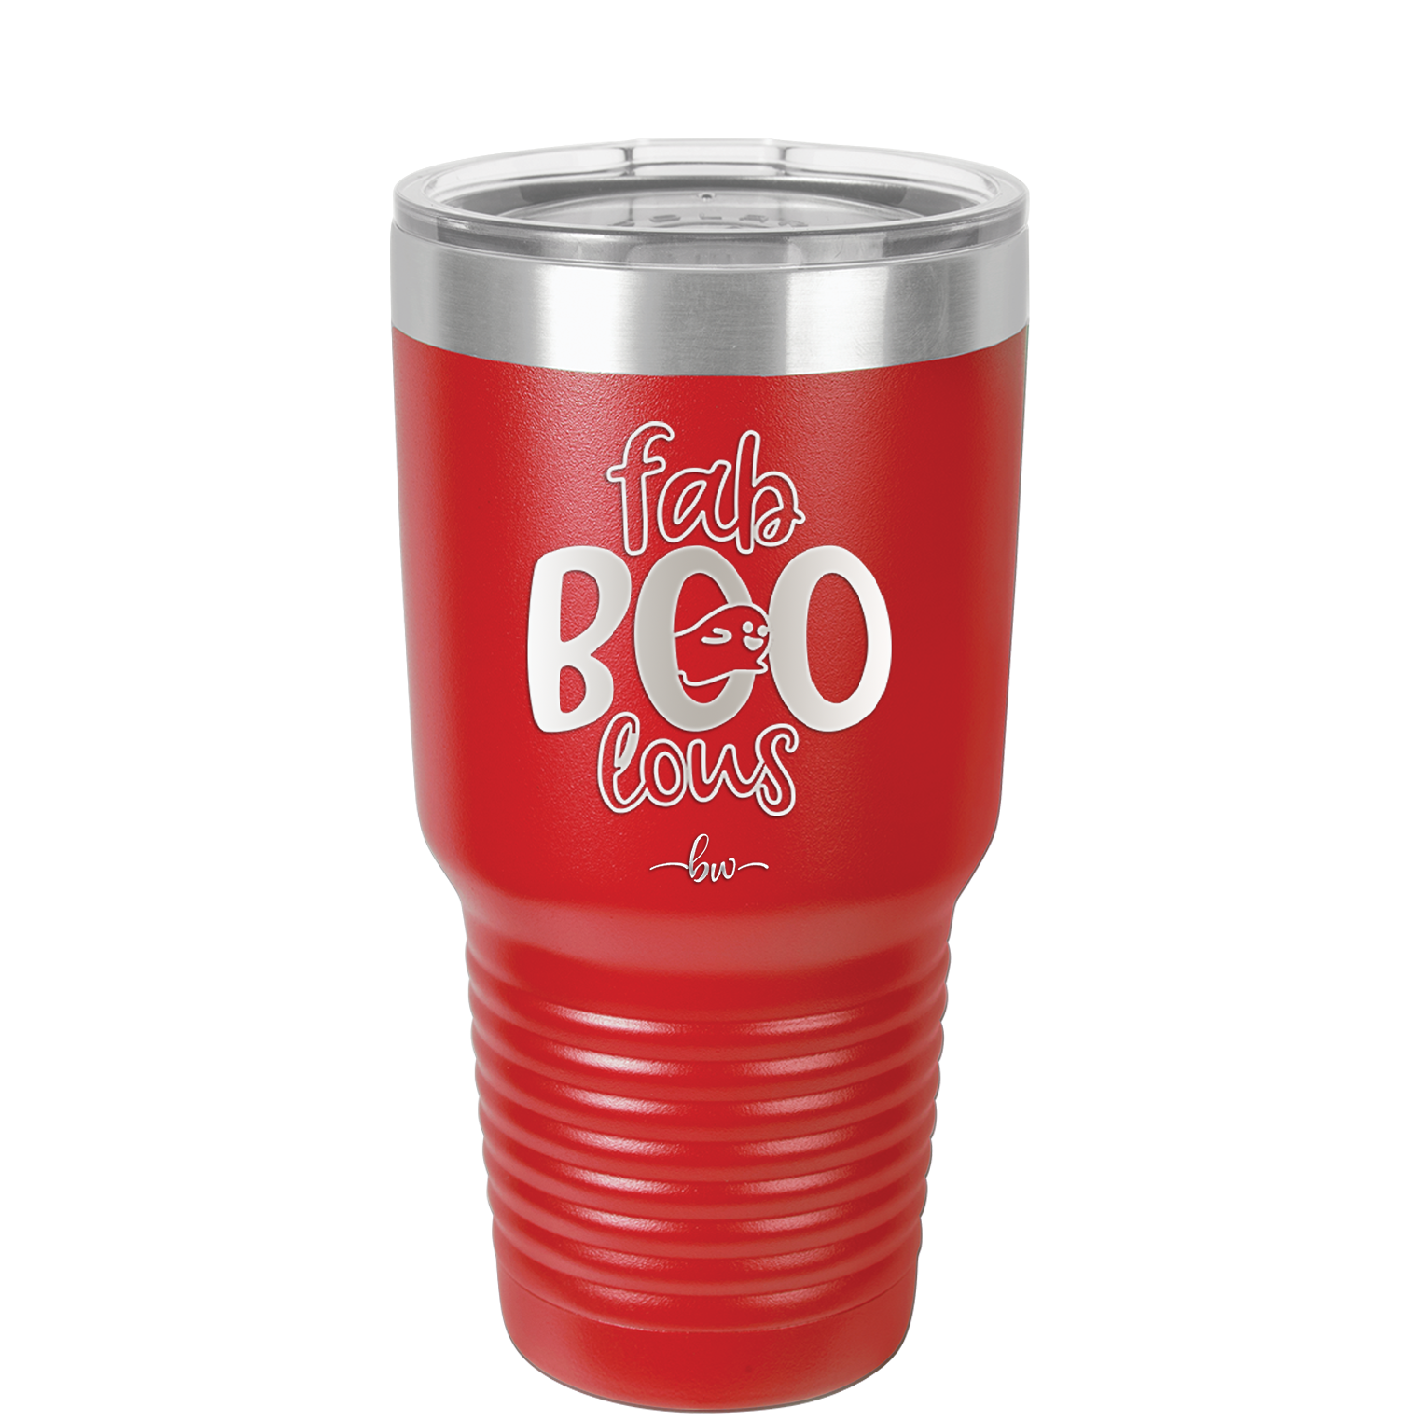 Fab Boo Lous - Laser Engraved Stainless Steel Drinkware - 1532 -